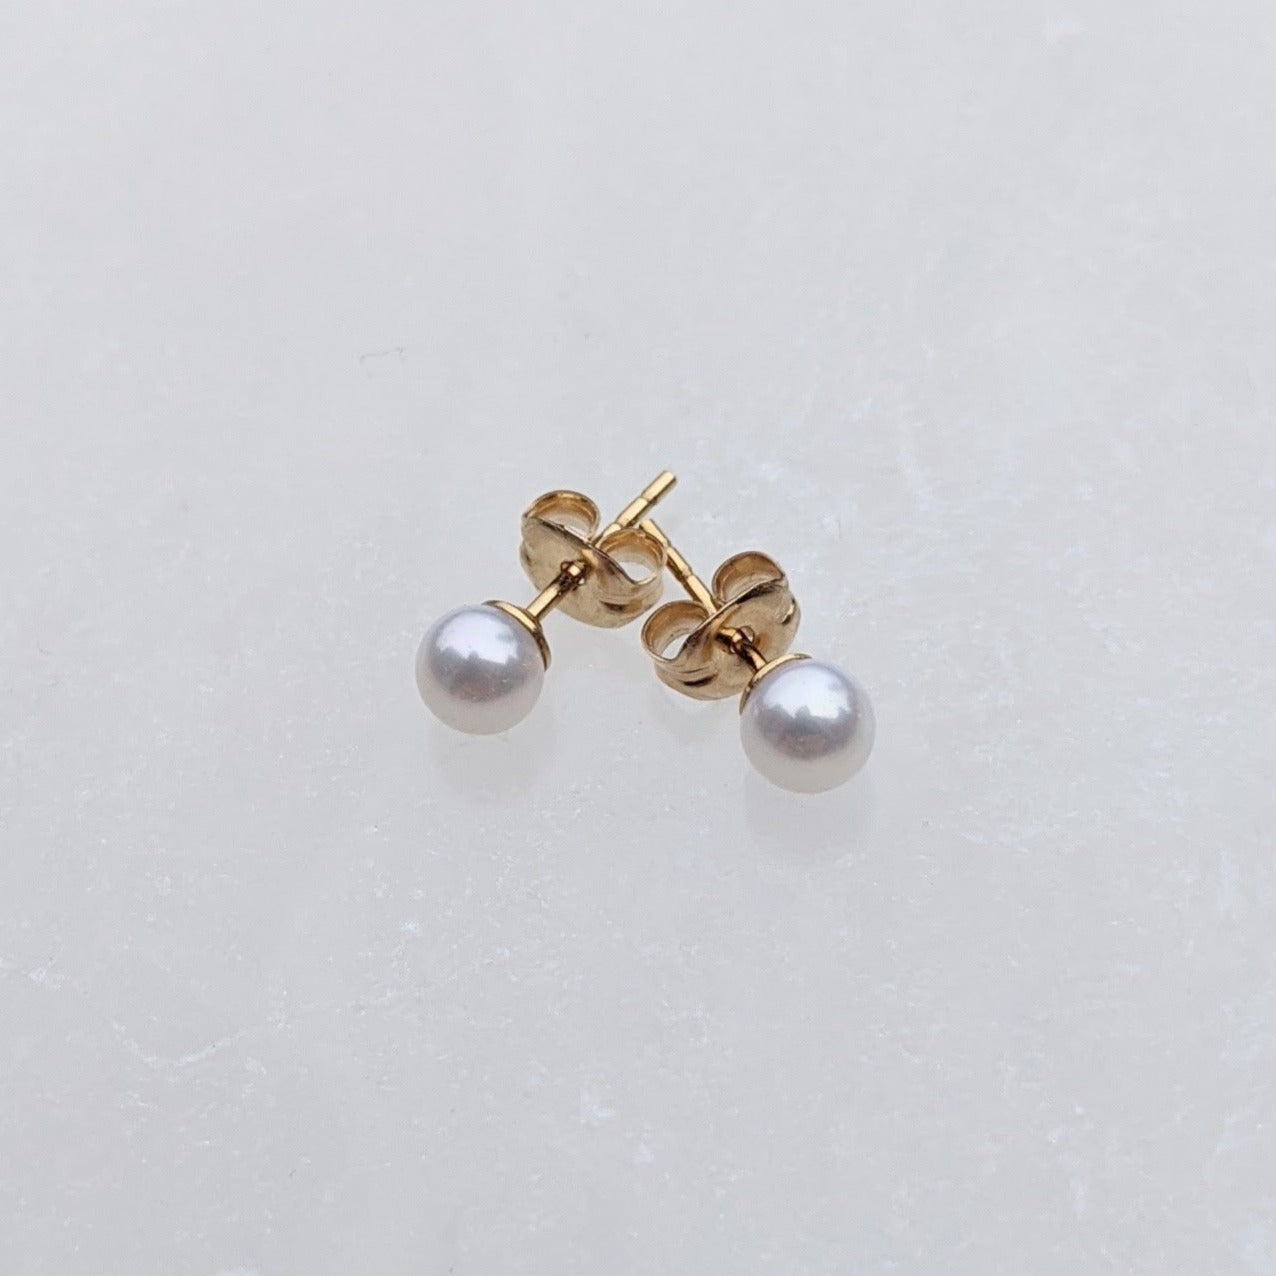 Small round pearl stud earrings